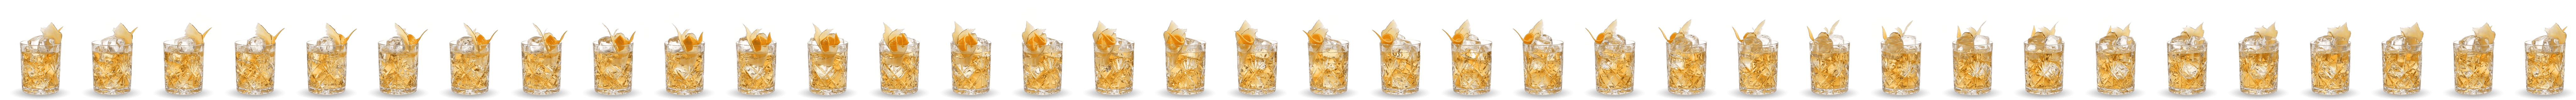 Bourbon and Ginger